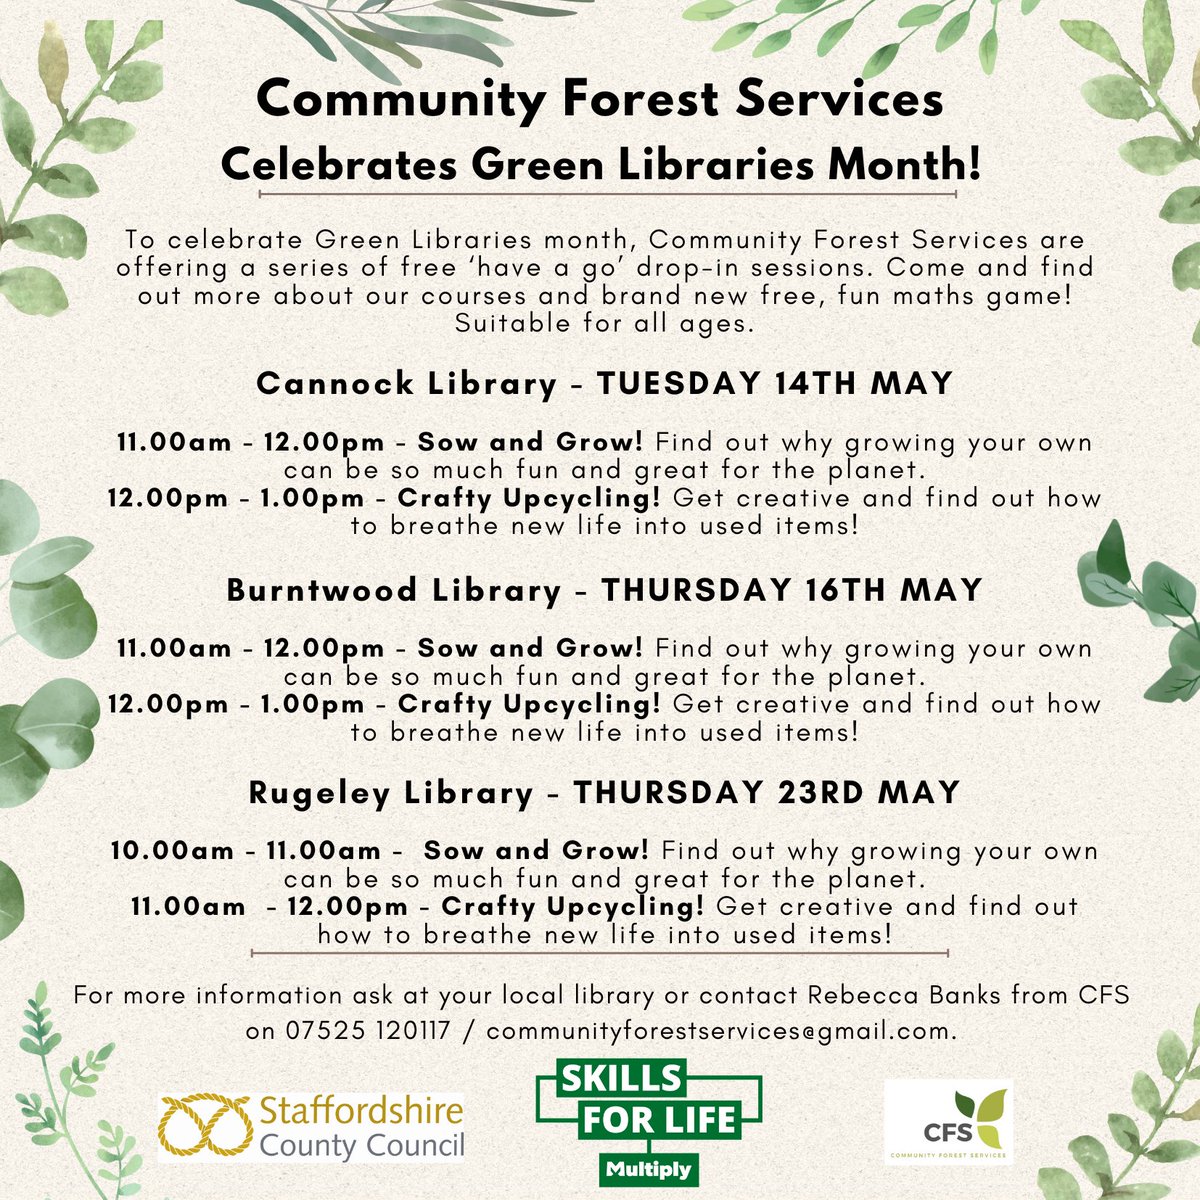 Get Green with Community Forest Services family friendly drop-ins at libraries in the Cannock Chase area in May! See the image for more details. #GreenLibraries #CannockLibrary #BurntwoodLibrary #RugeleyLibrary
@CityRugeley
@LichfieldCity
@CannockChaseDC
@StaffordshireCC